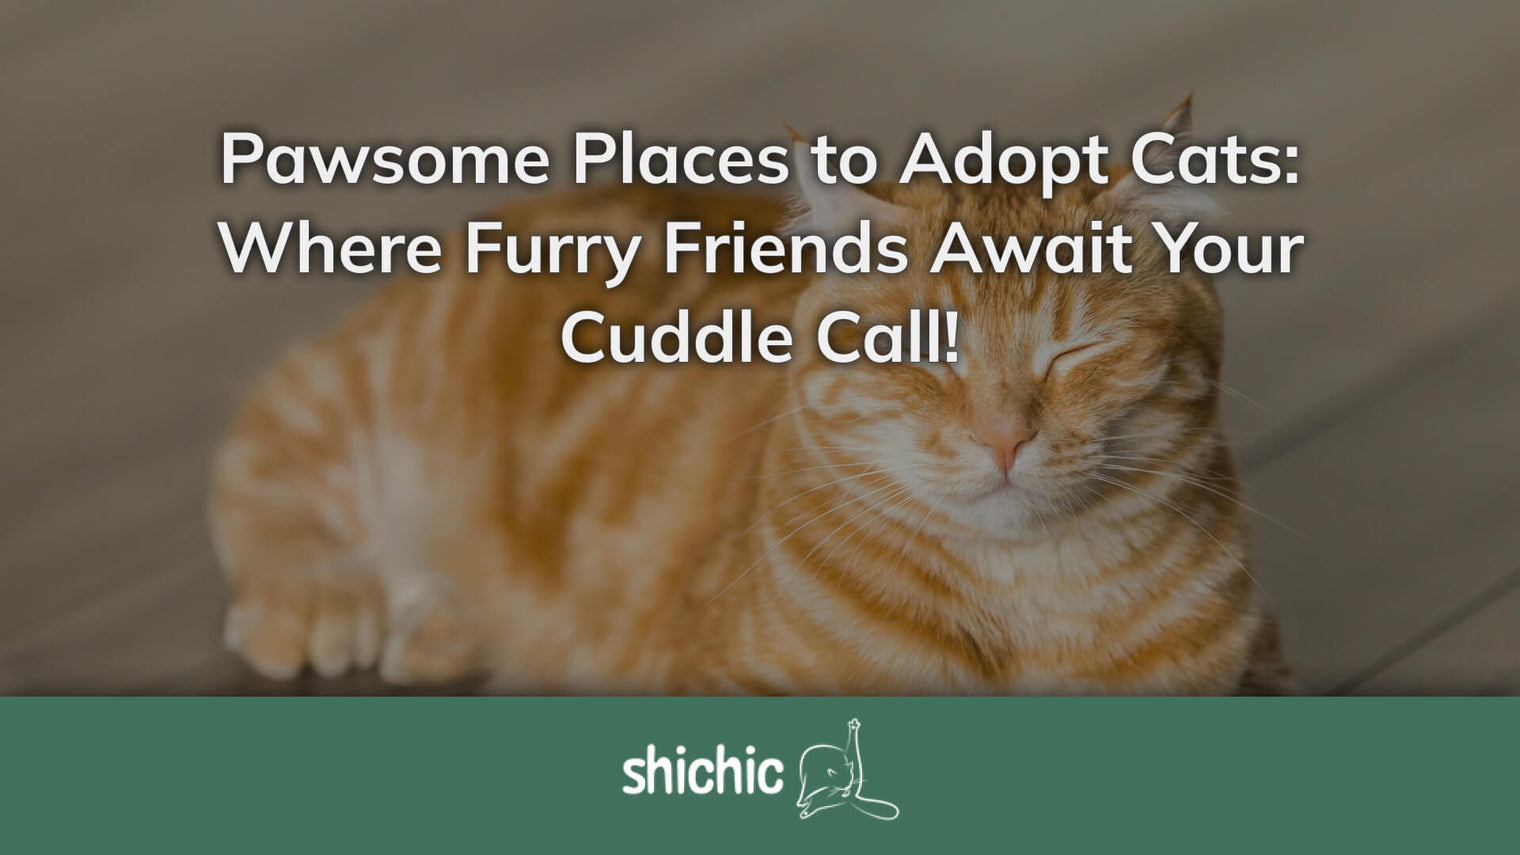 Pawsome Places to Adopt Cats: Where Furry Friends Await Your Cuddle Call! - Shichic